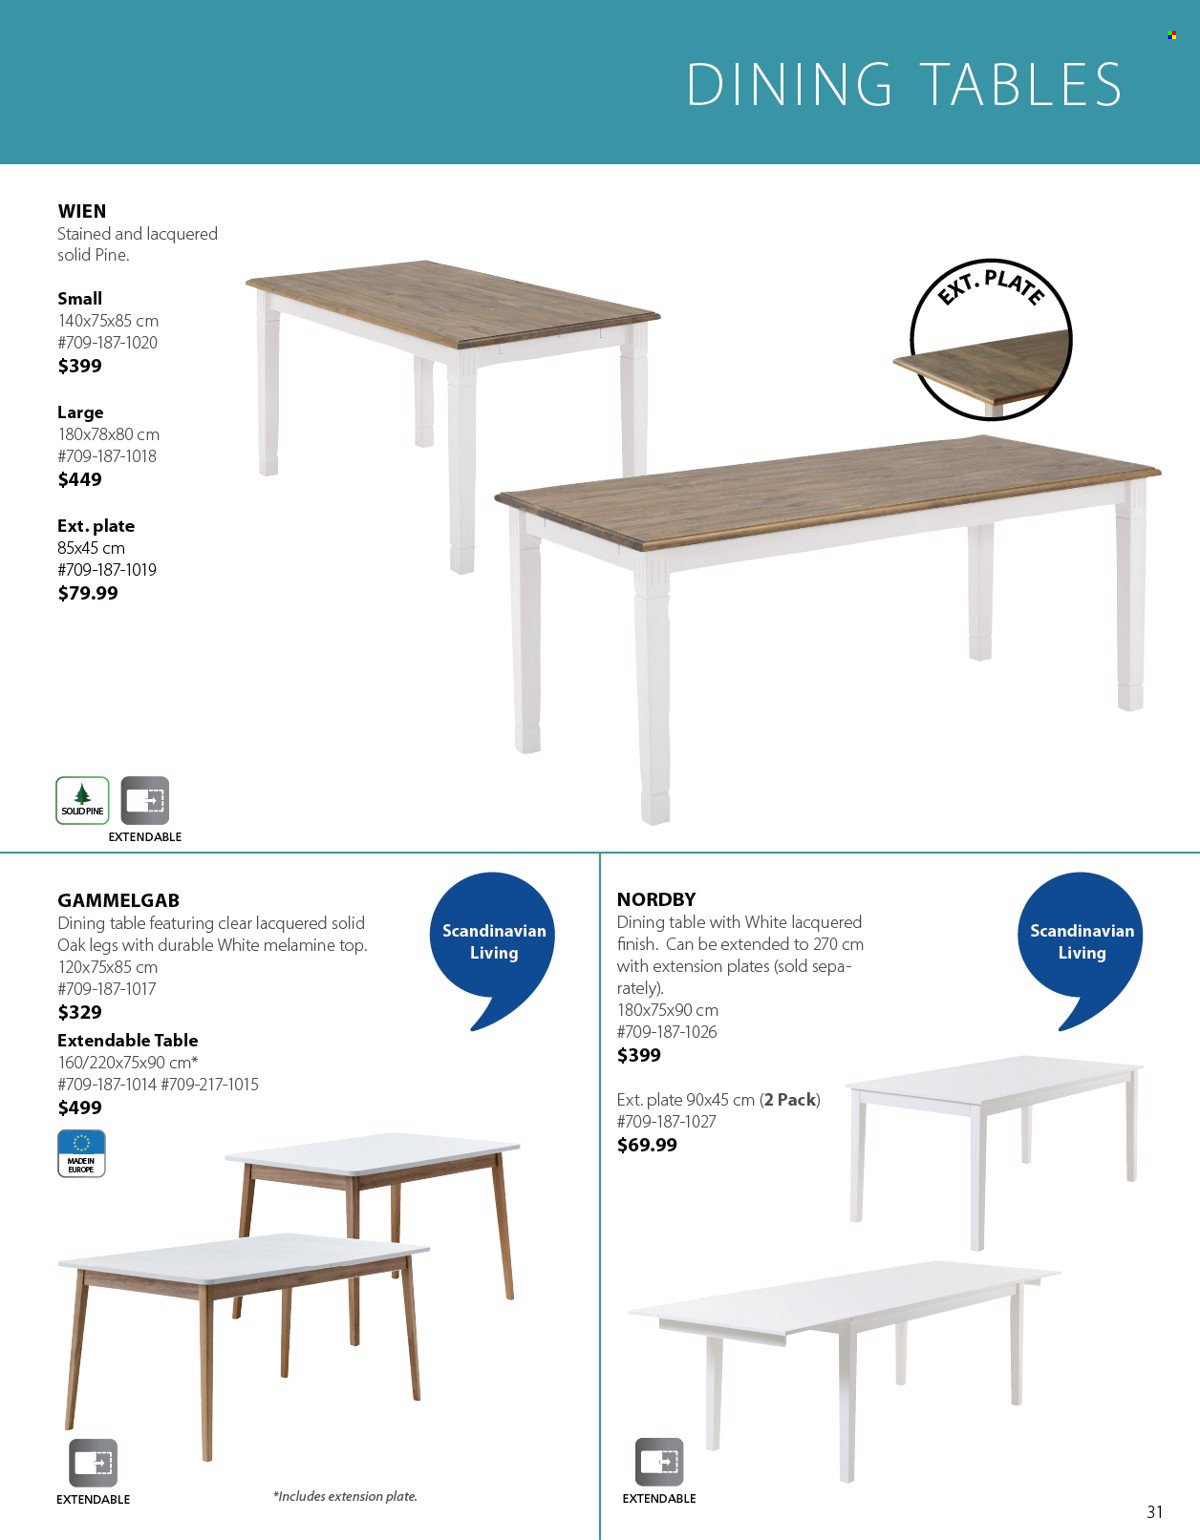 thumbnail - JYSK Flyer - Sales products - plate, dining table, extendable table, table. Page 31.